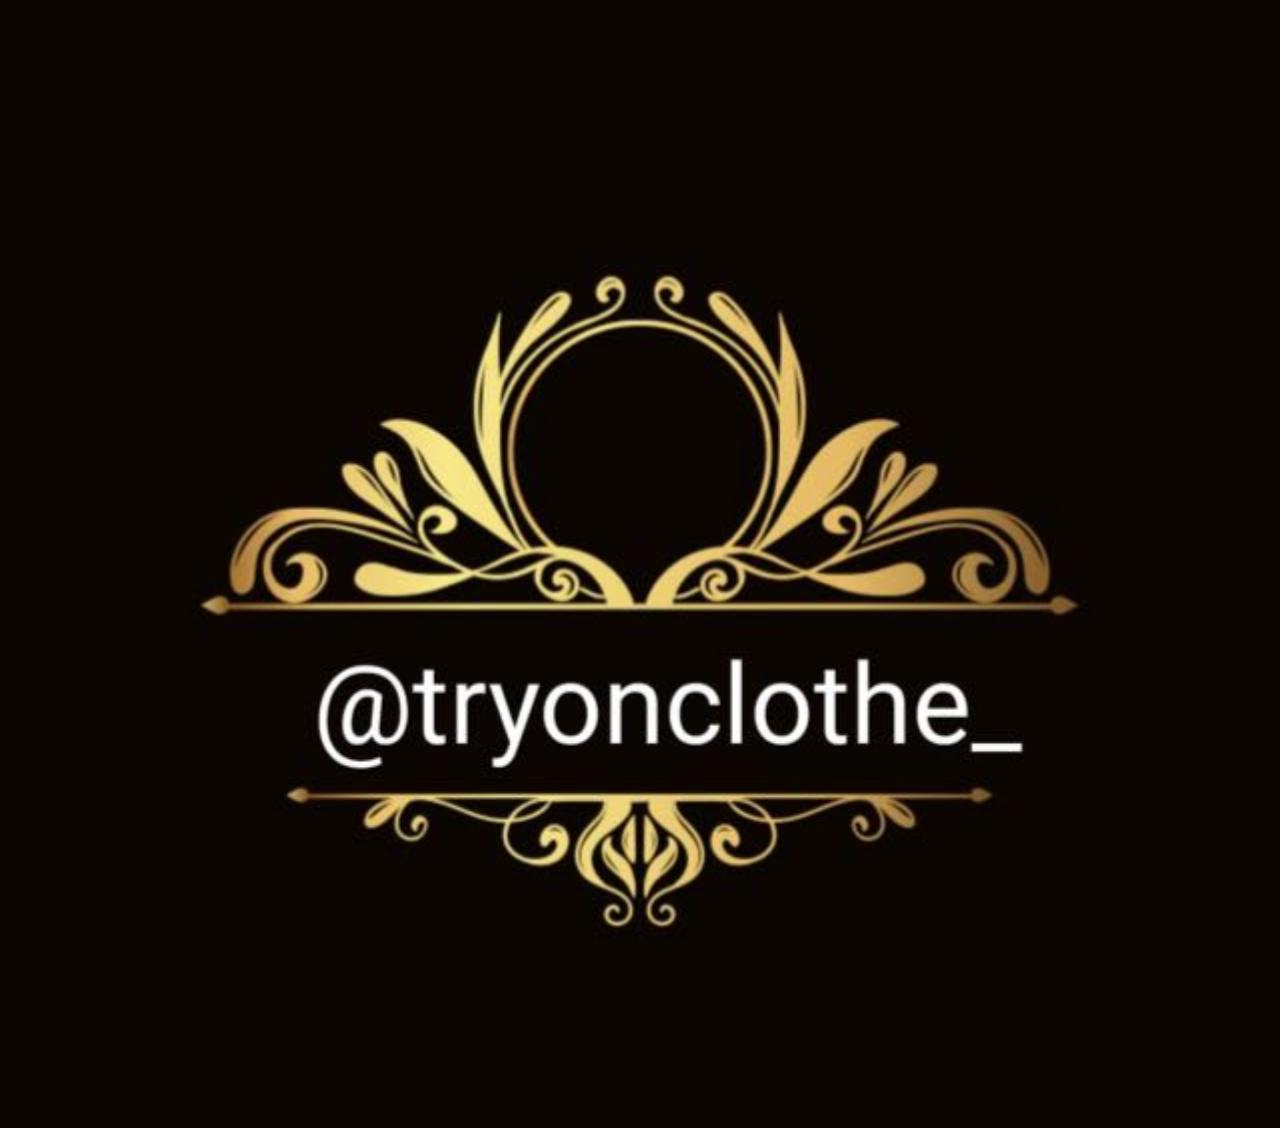 Tryonclothe